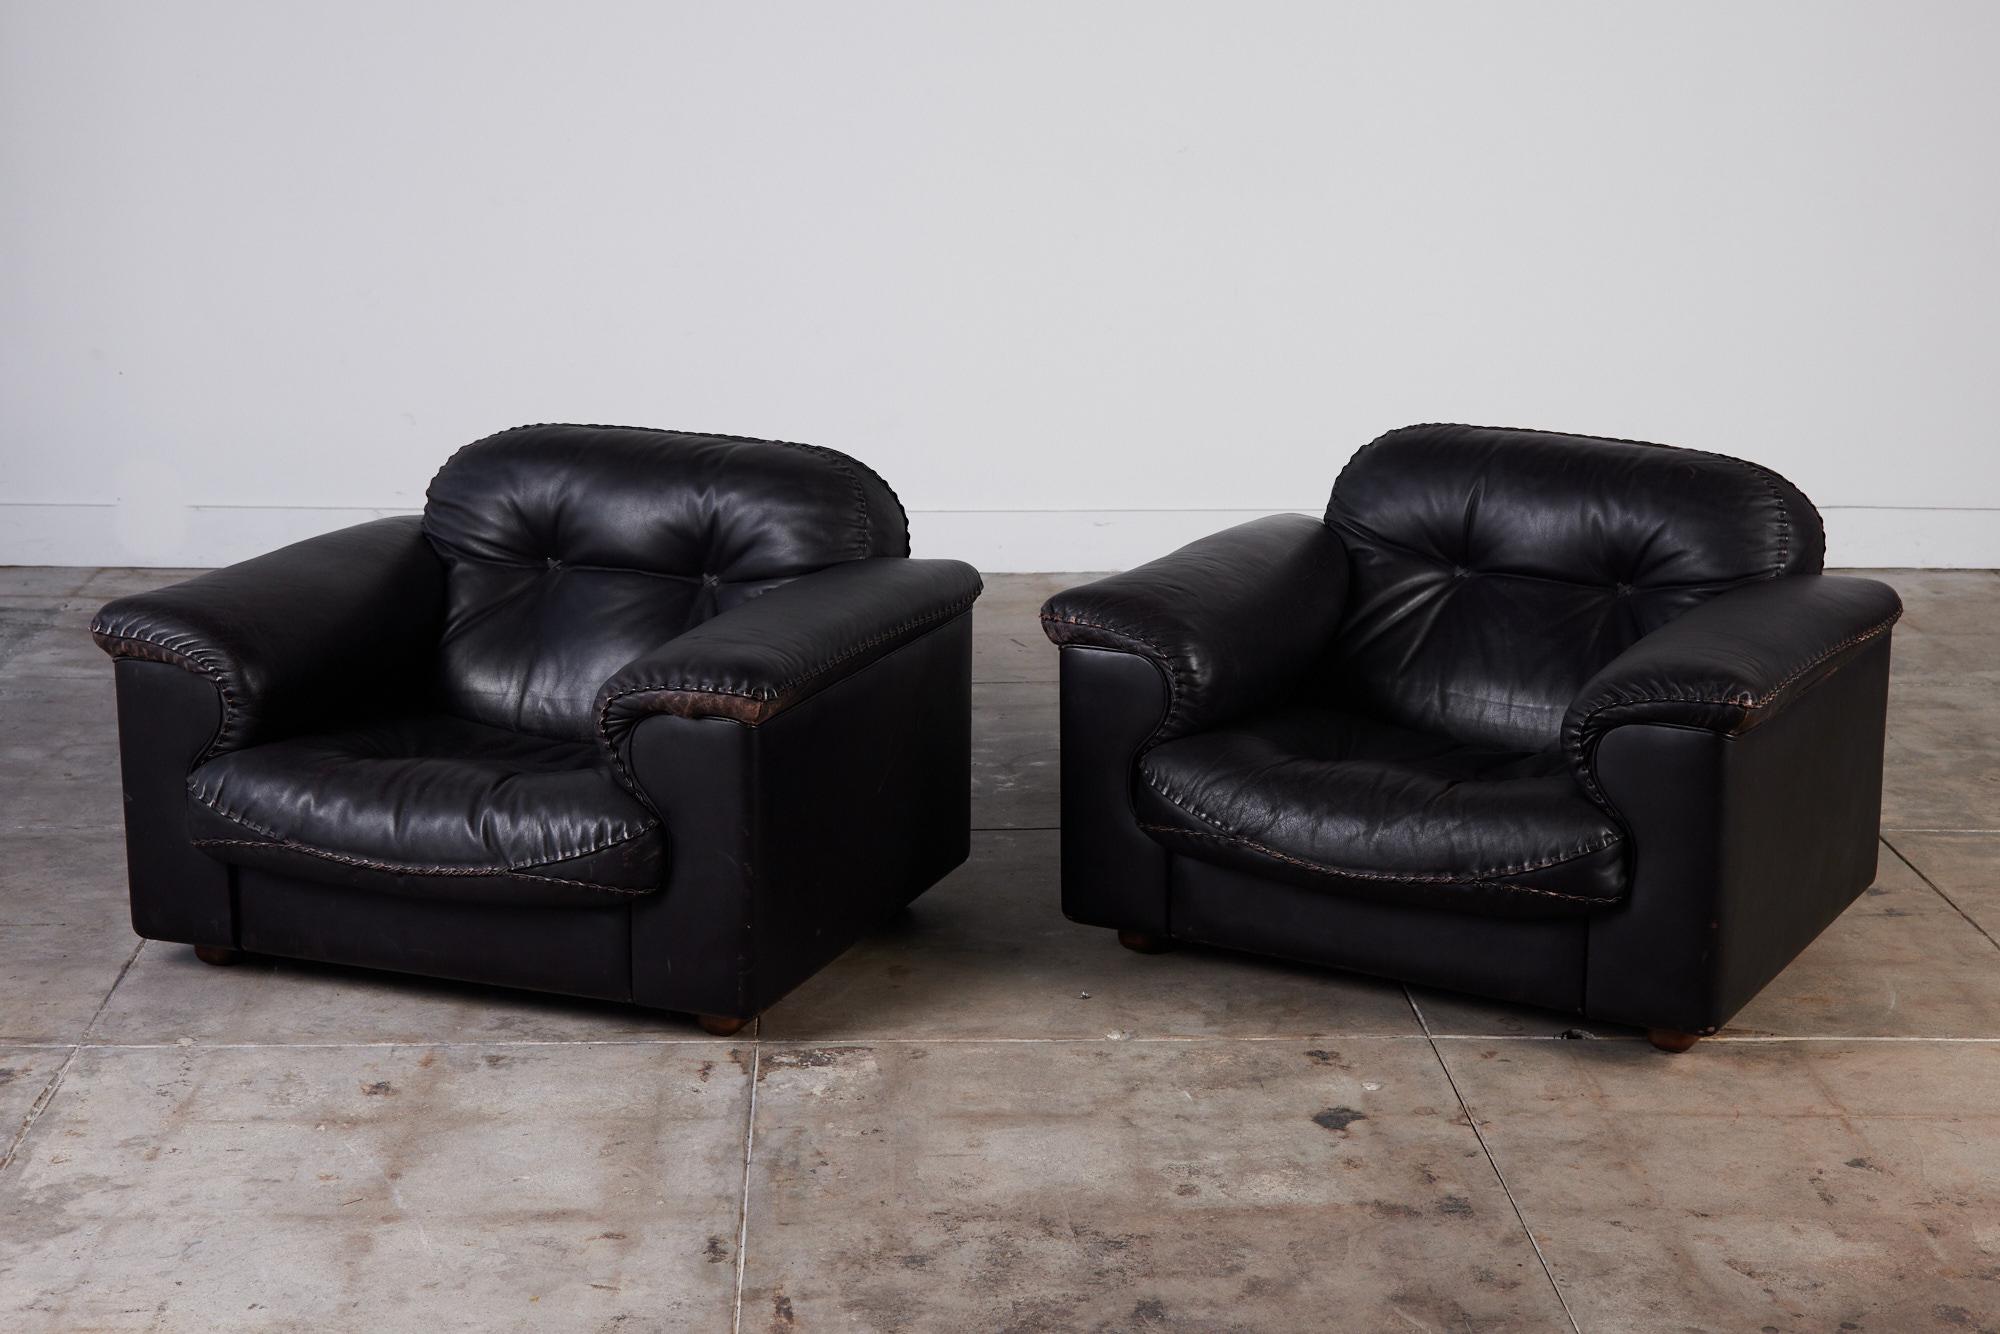 A pair of De Sede leather lounge chairs upholstered in dark espresso leather, c.1970s. These Swiss made chairs feature a reclining mechanism that allows the seats to extend forward while the back rests recline for maximum comfort. The hand stitched